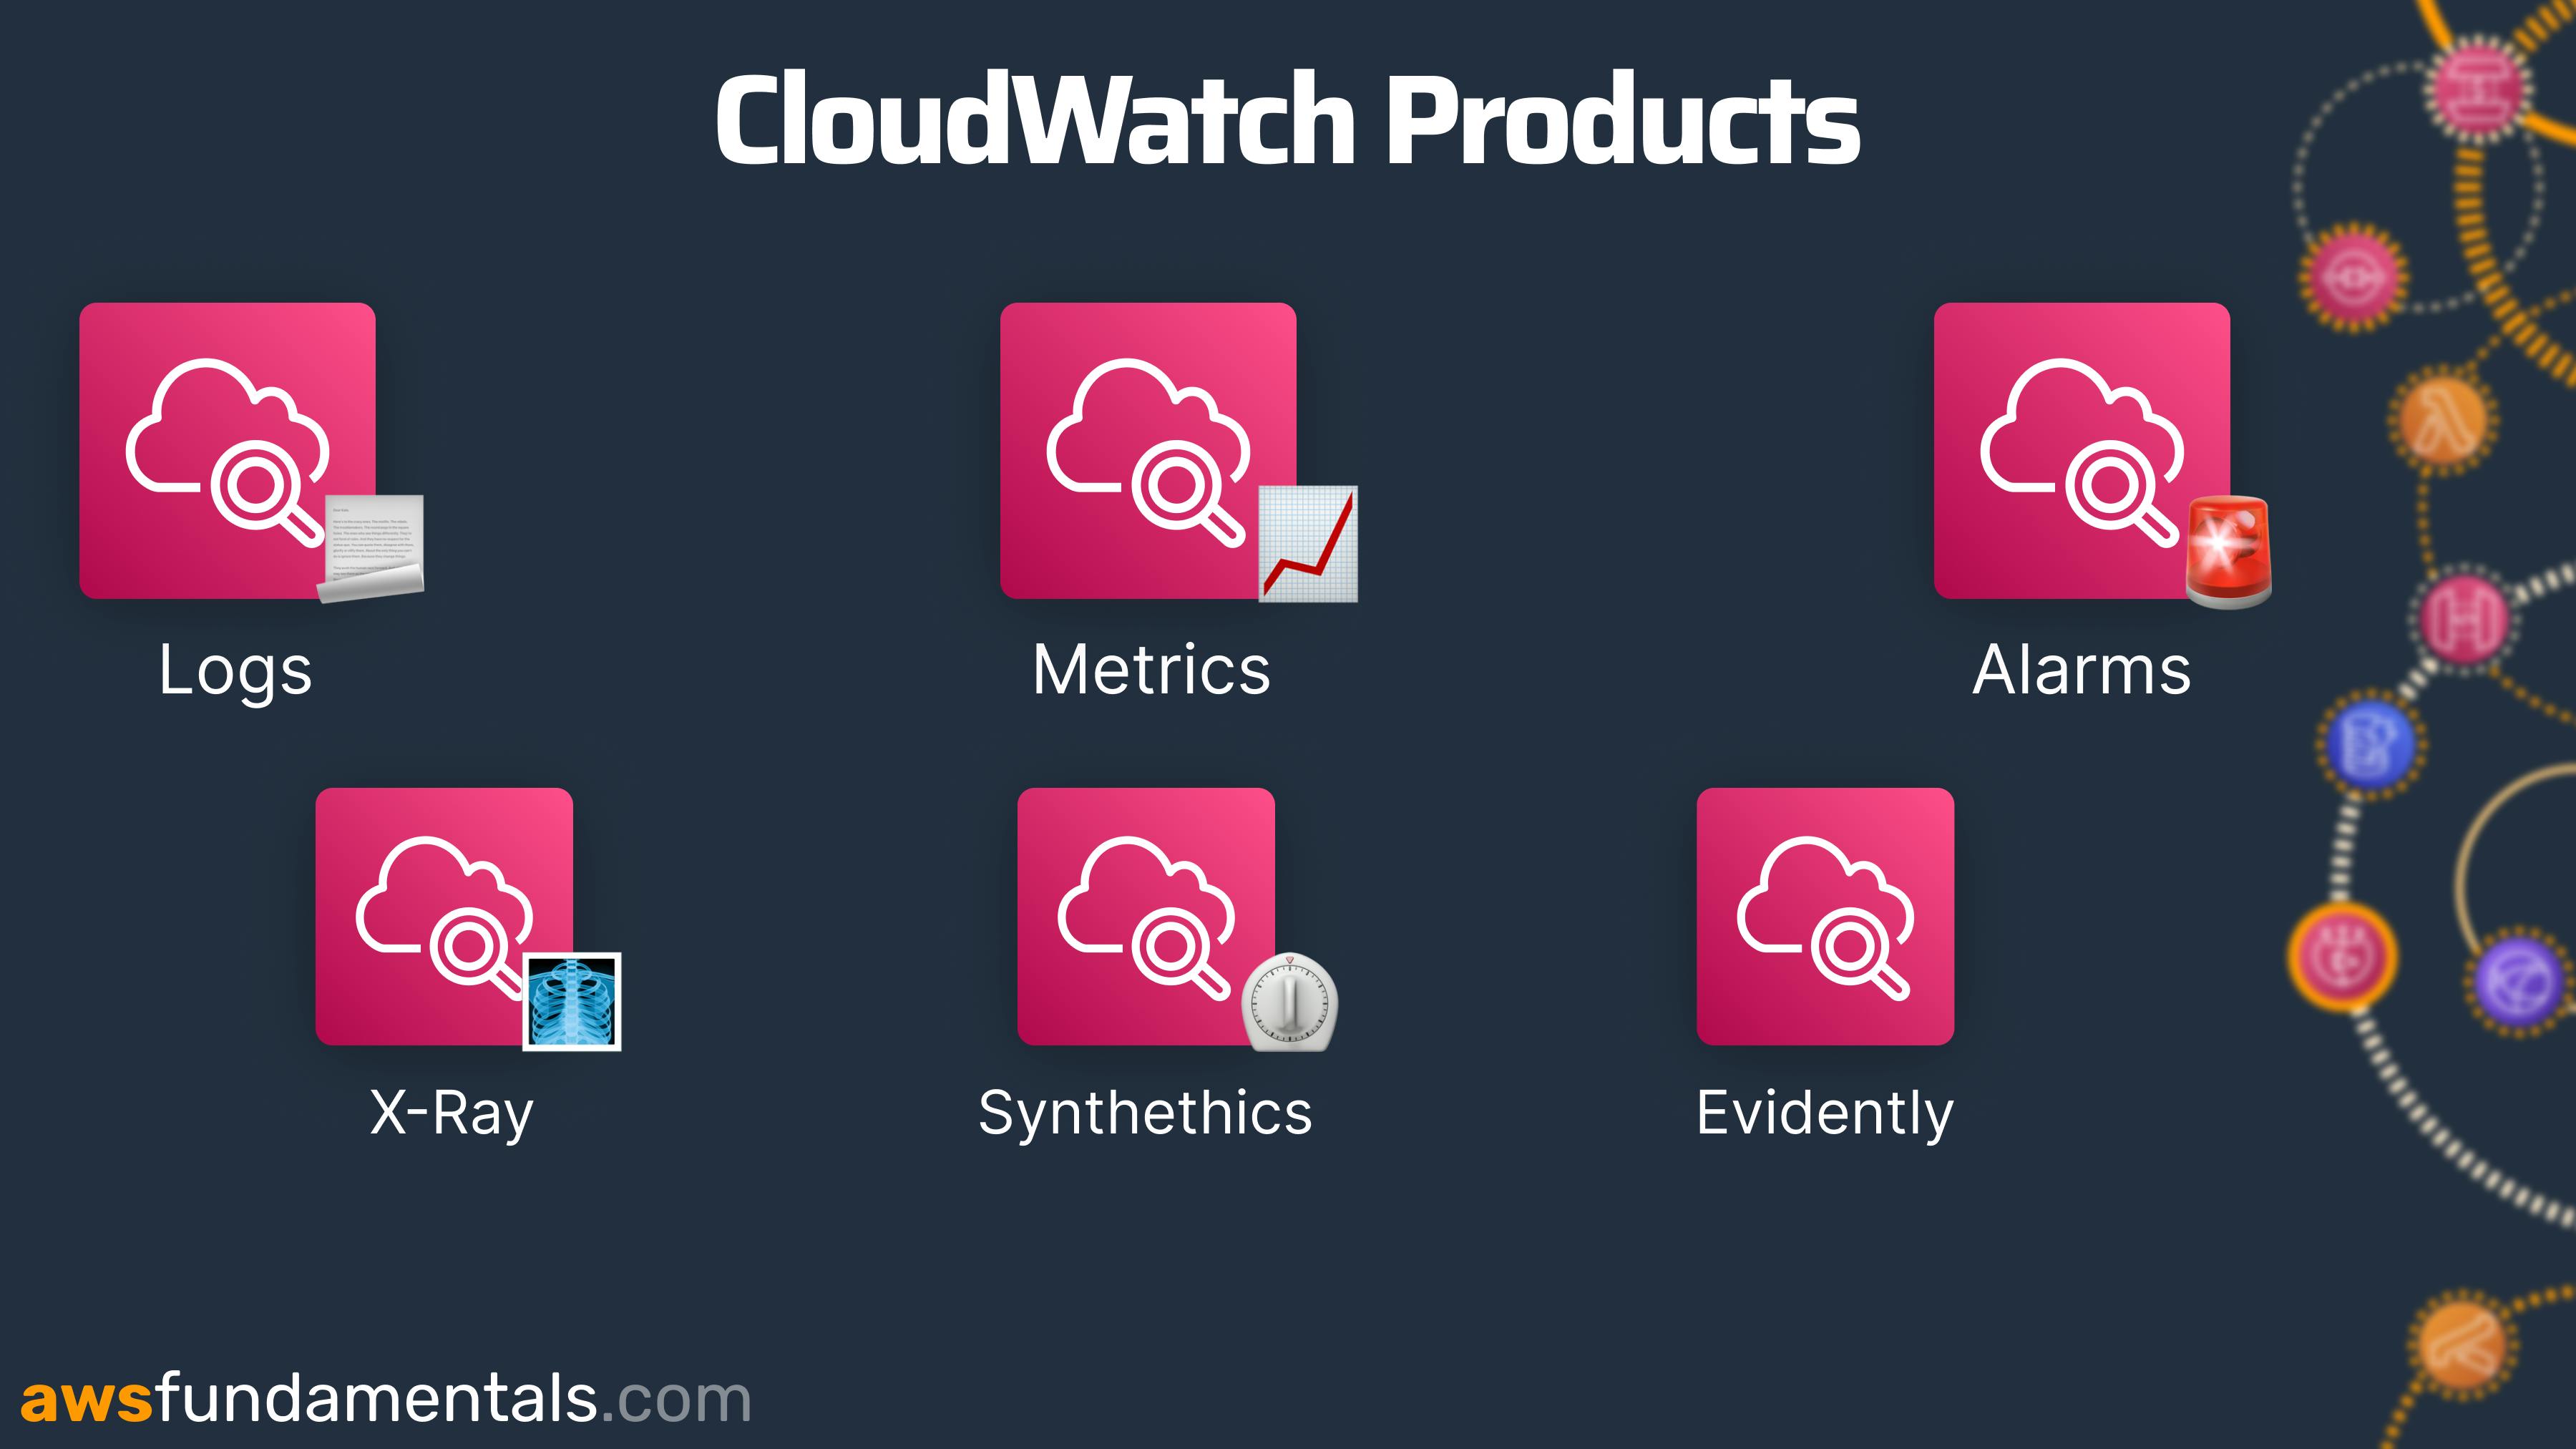 CloudWatch Products